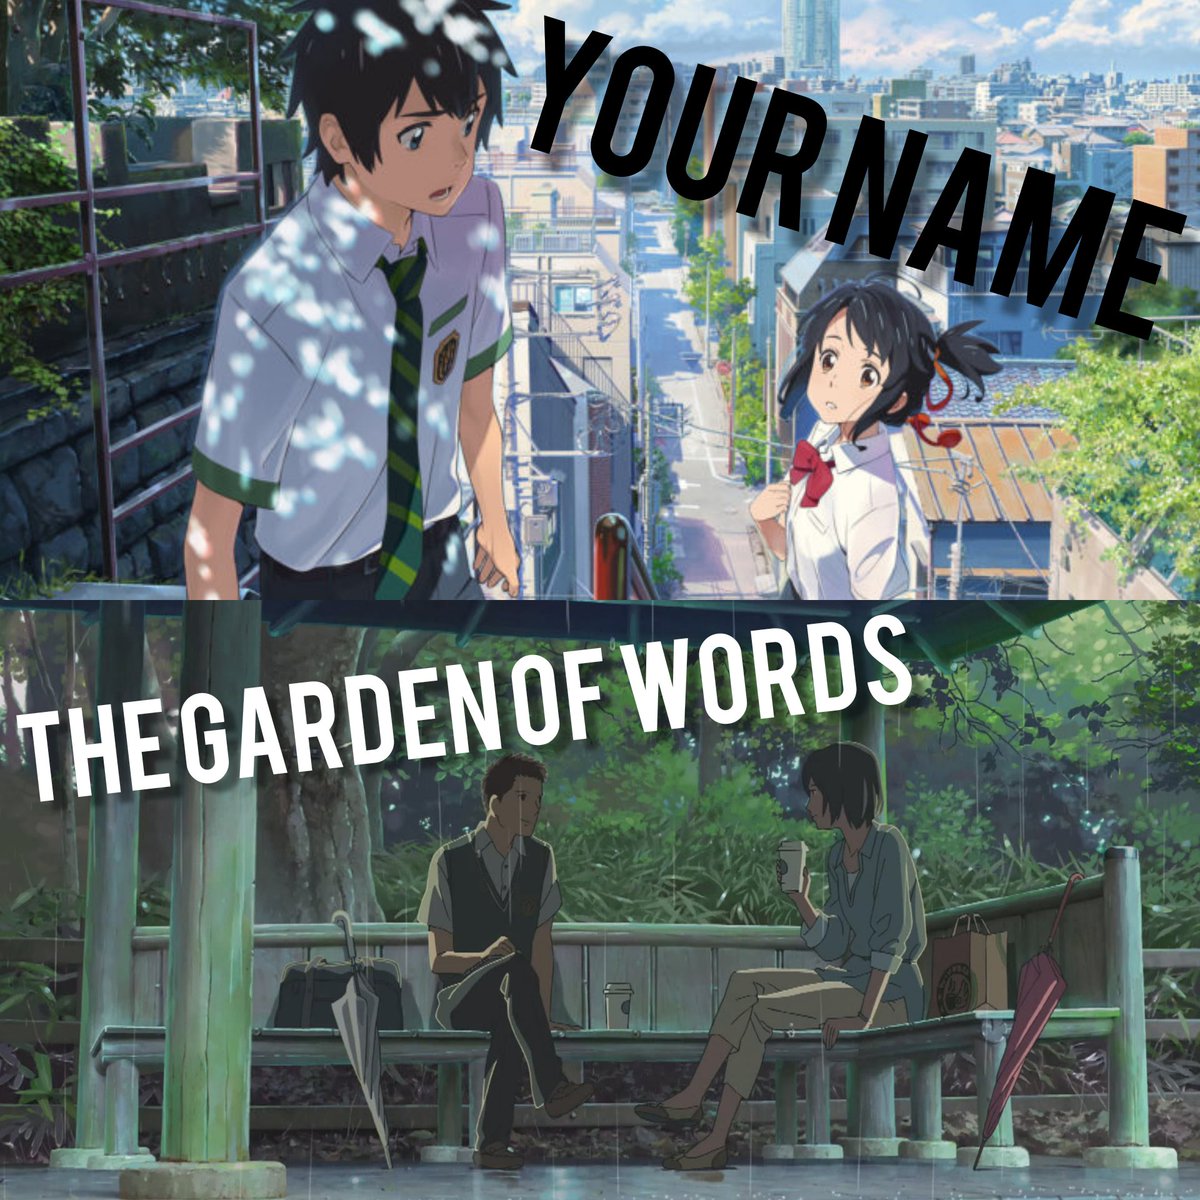 Mikasa Ackerman On Twitter Your Name And The Garden Of Words